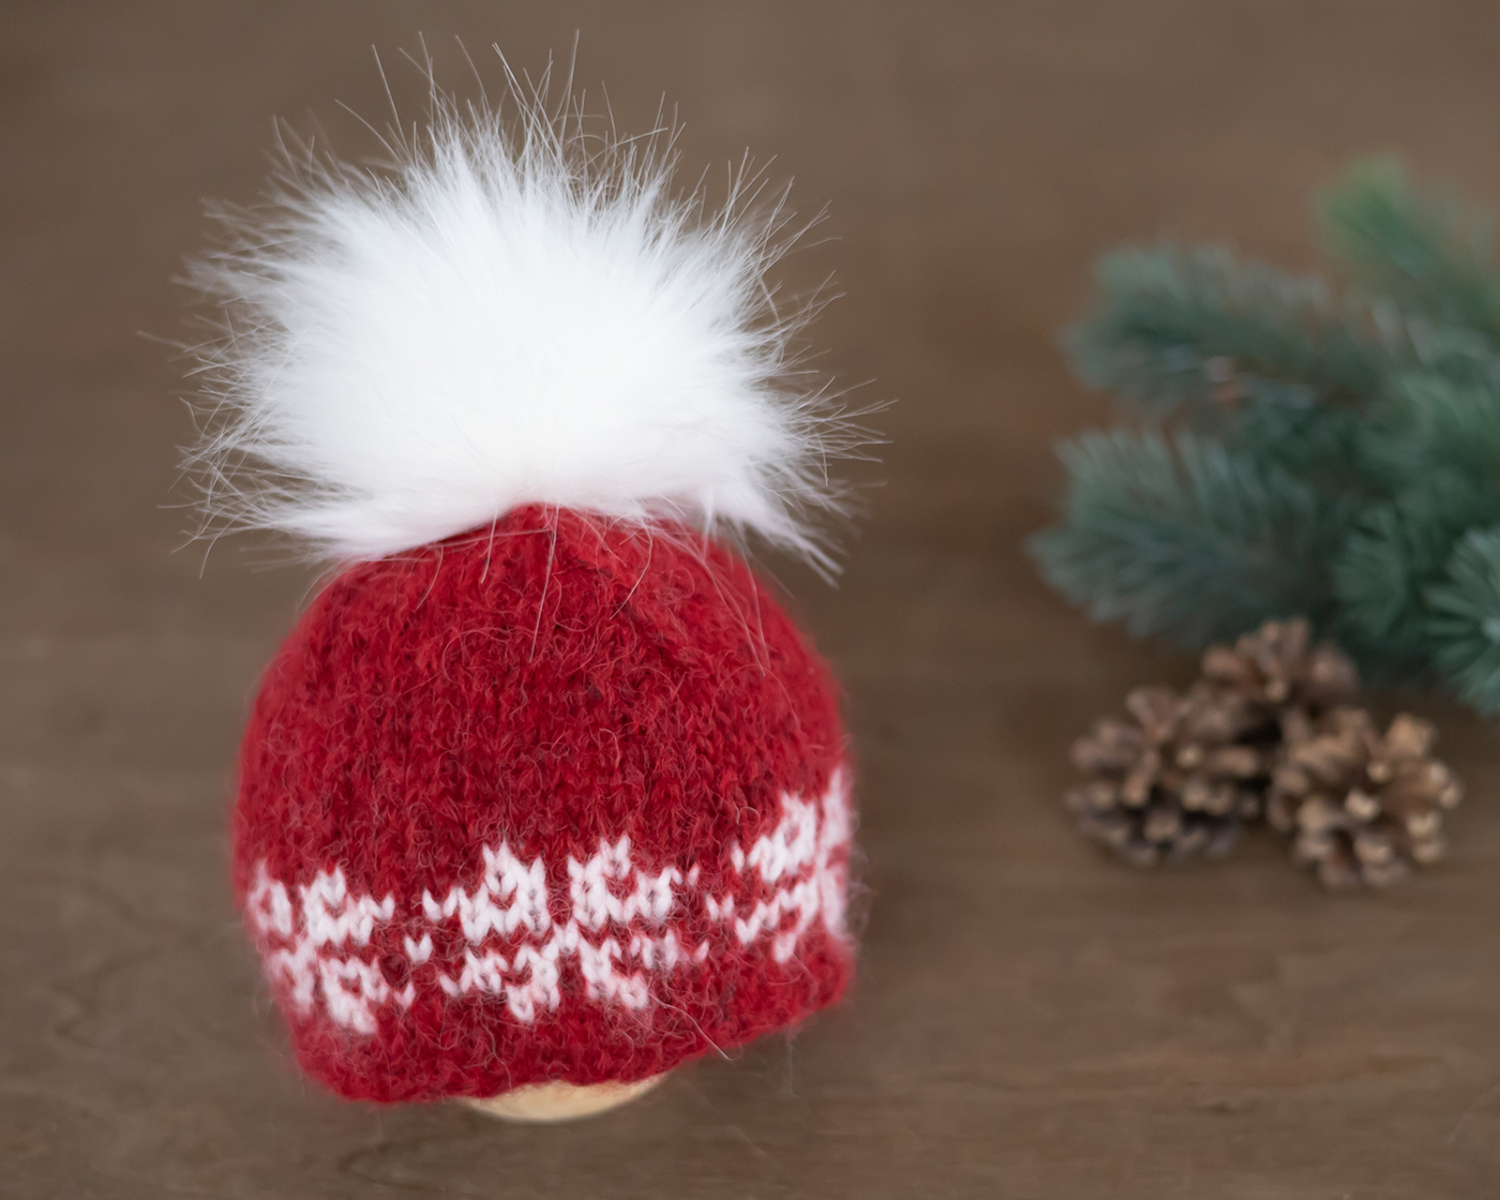 Red-White Knitted Newborn Hat with Pom Pom